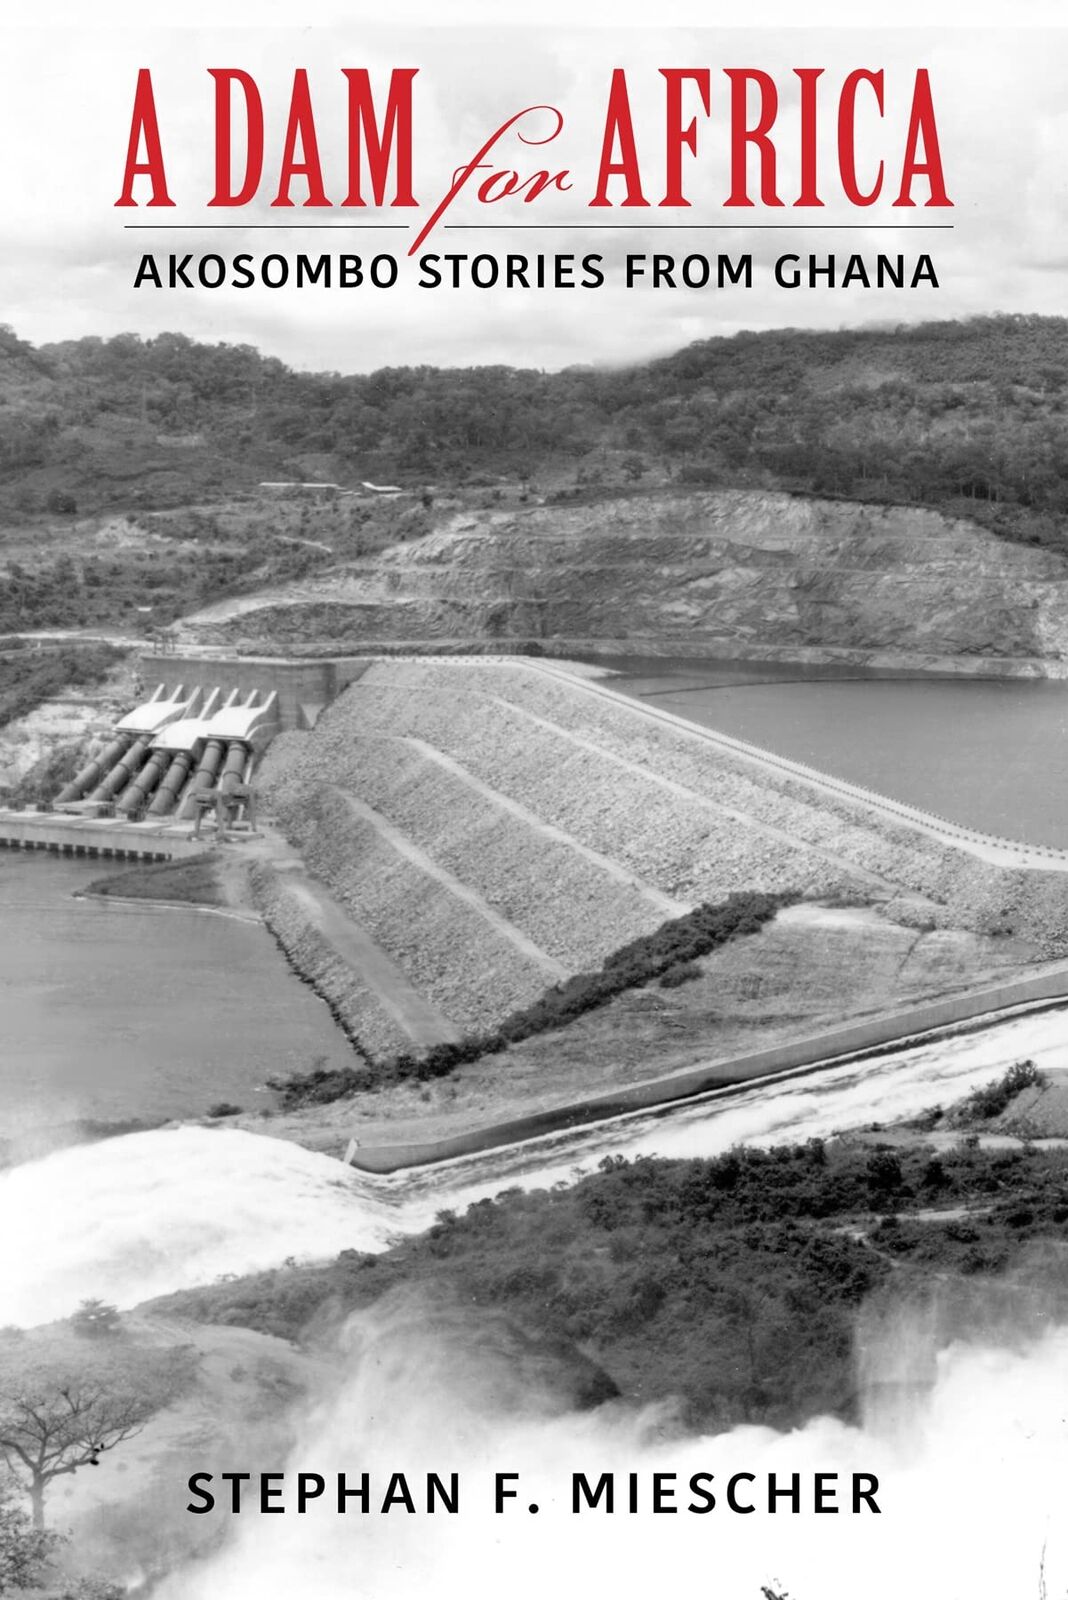 Book cover for 'A Dam for Africa: Akosombo Stories from Ghana' by Stephan F. Miescher